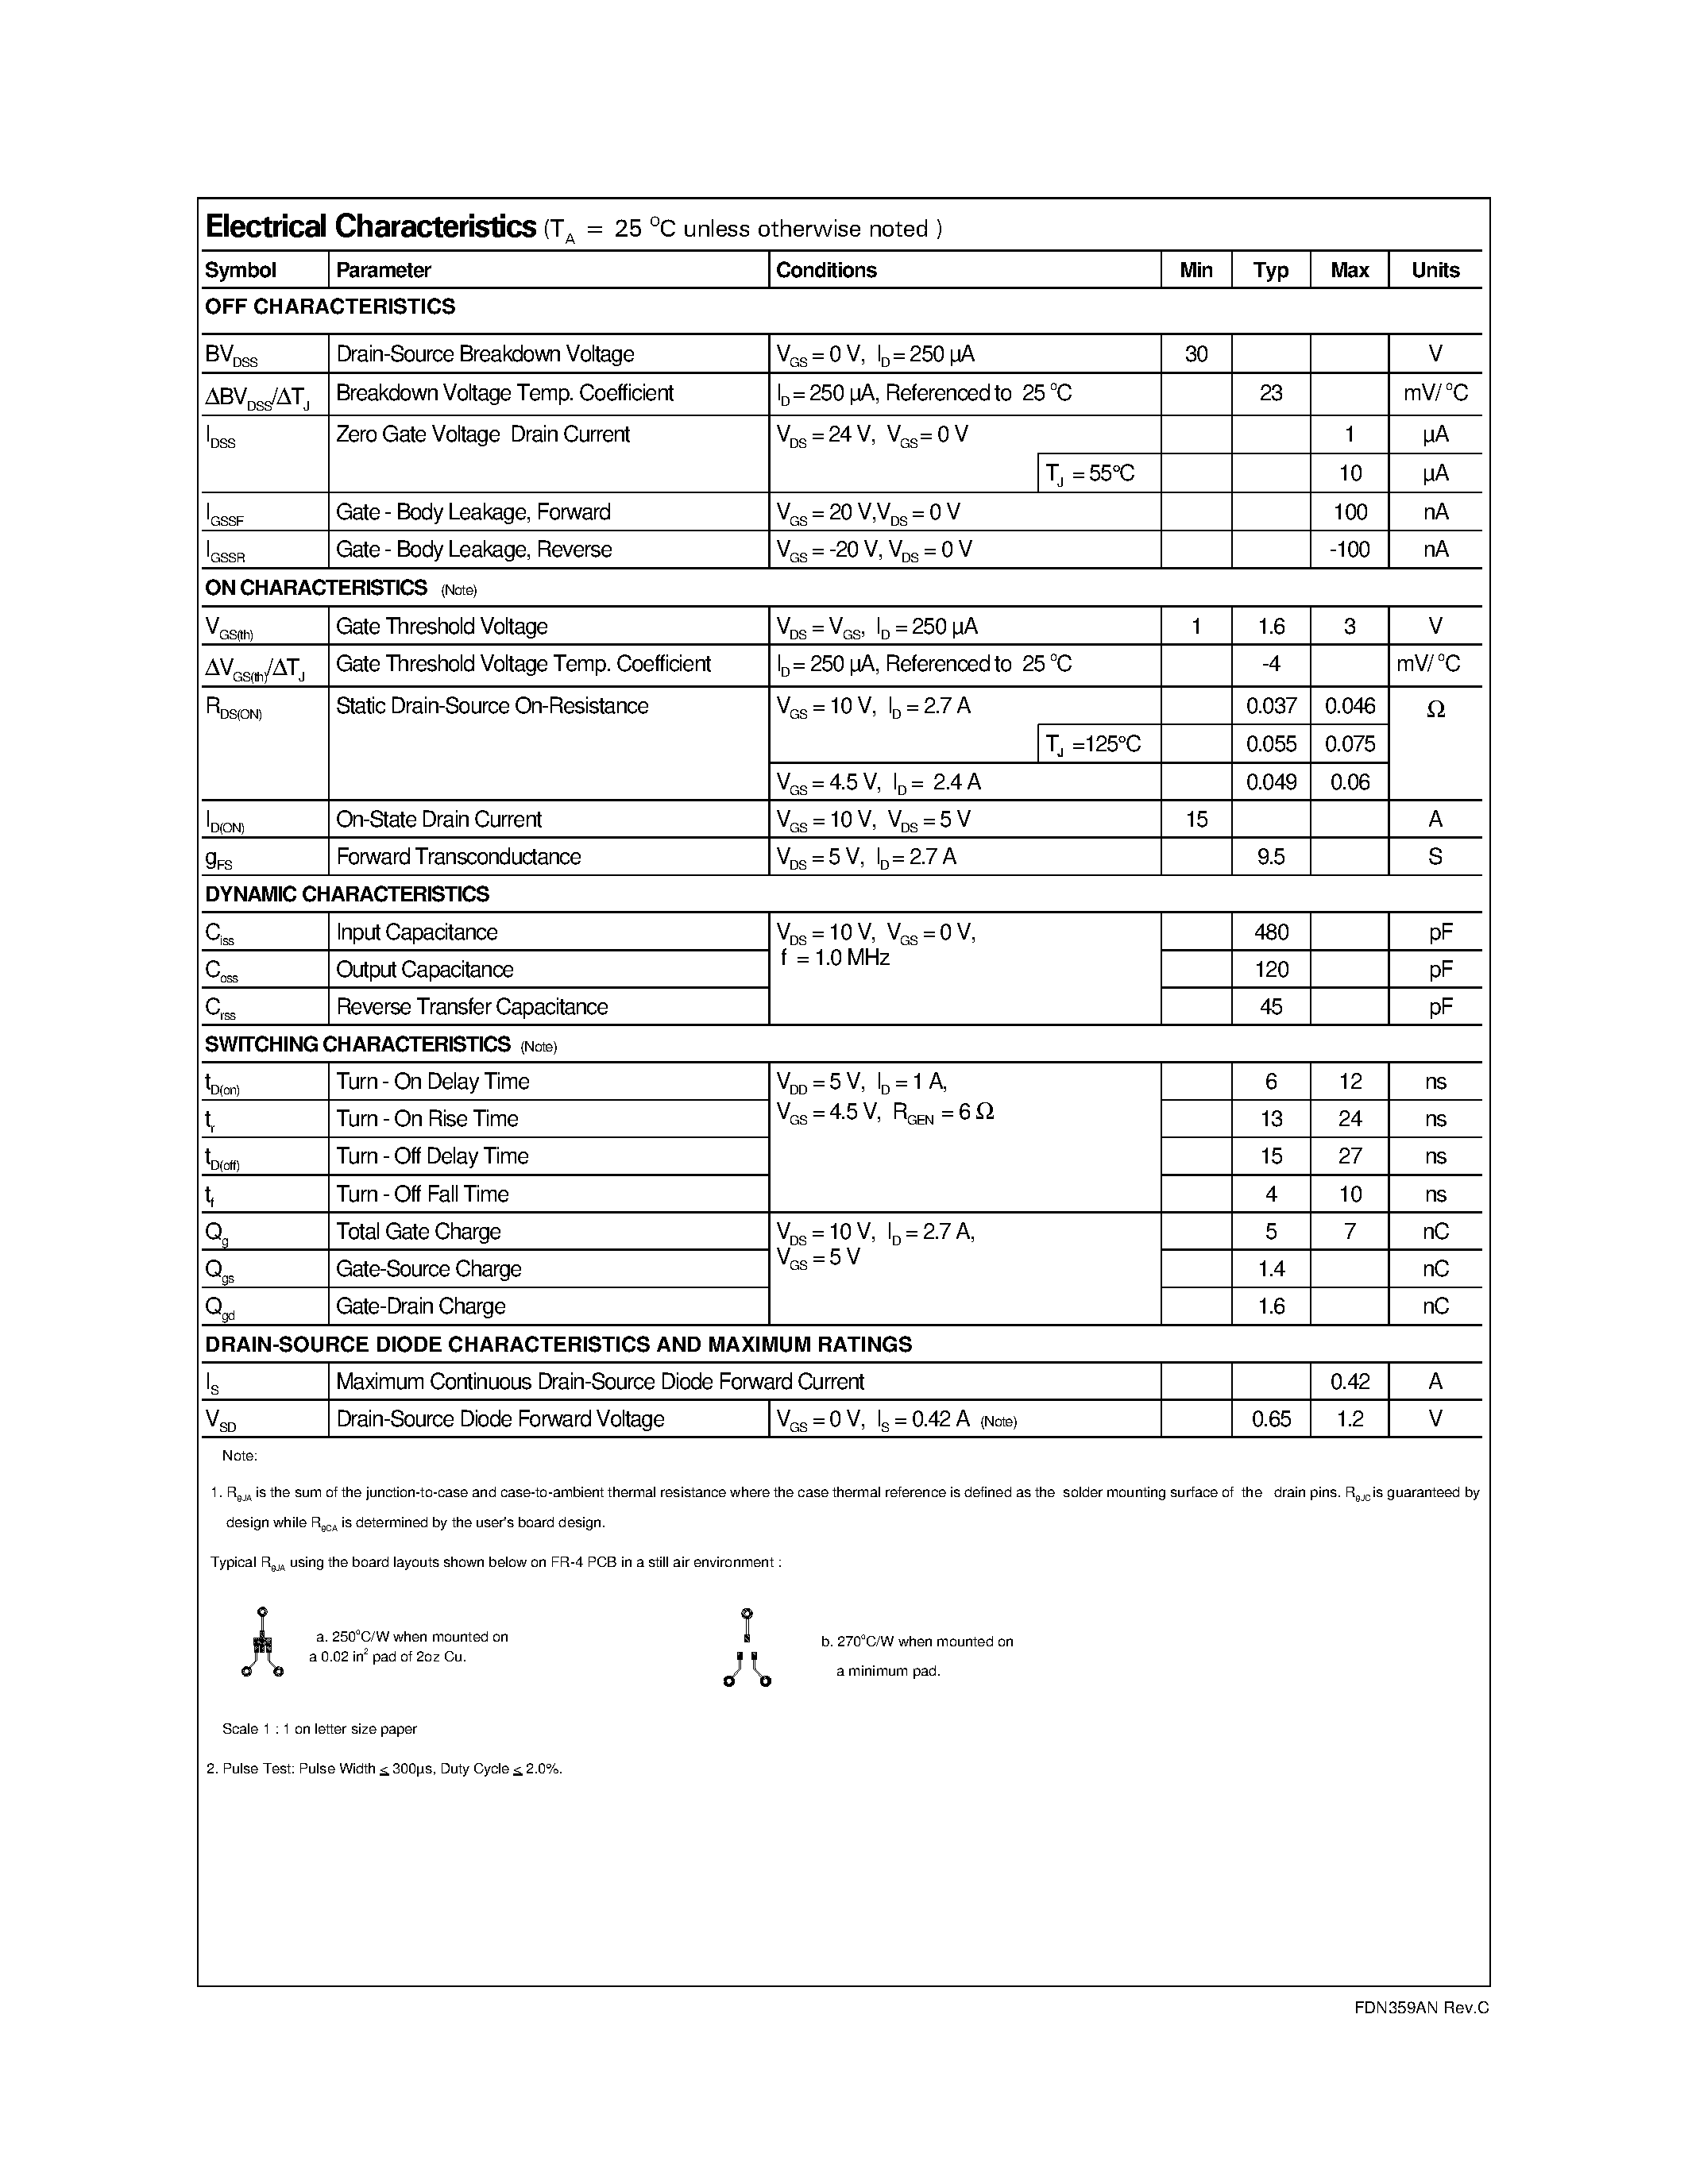 Datasheet FDN359 - N-Channel Logic Level PowerTrenchTM MOSFET page 2